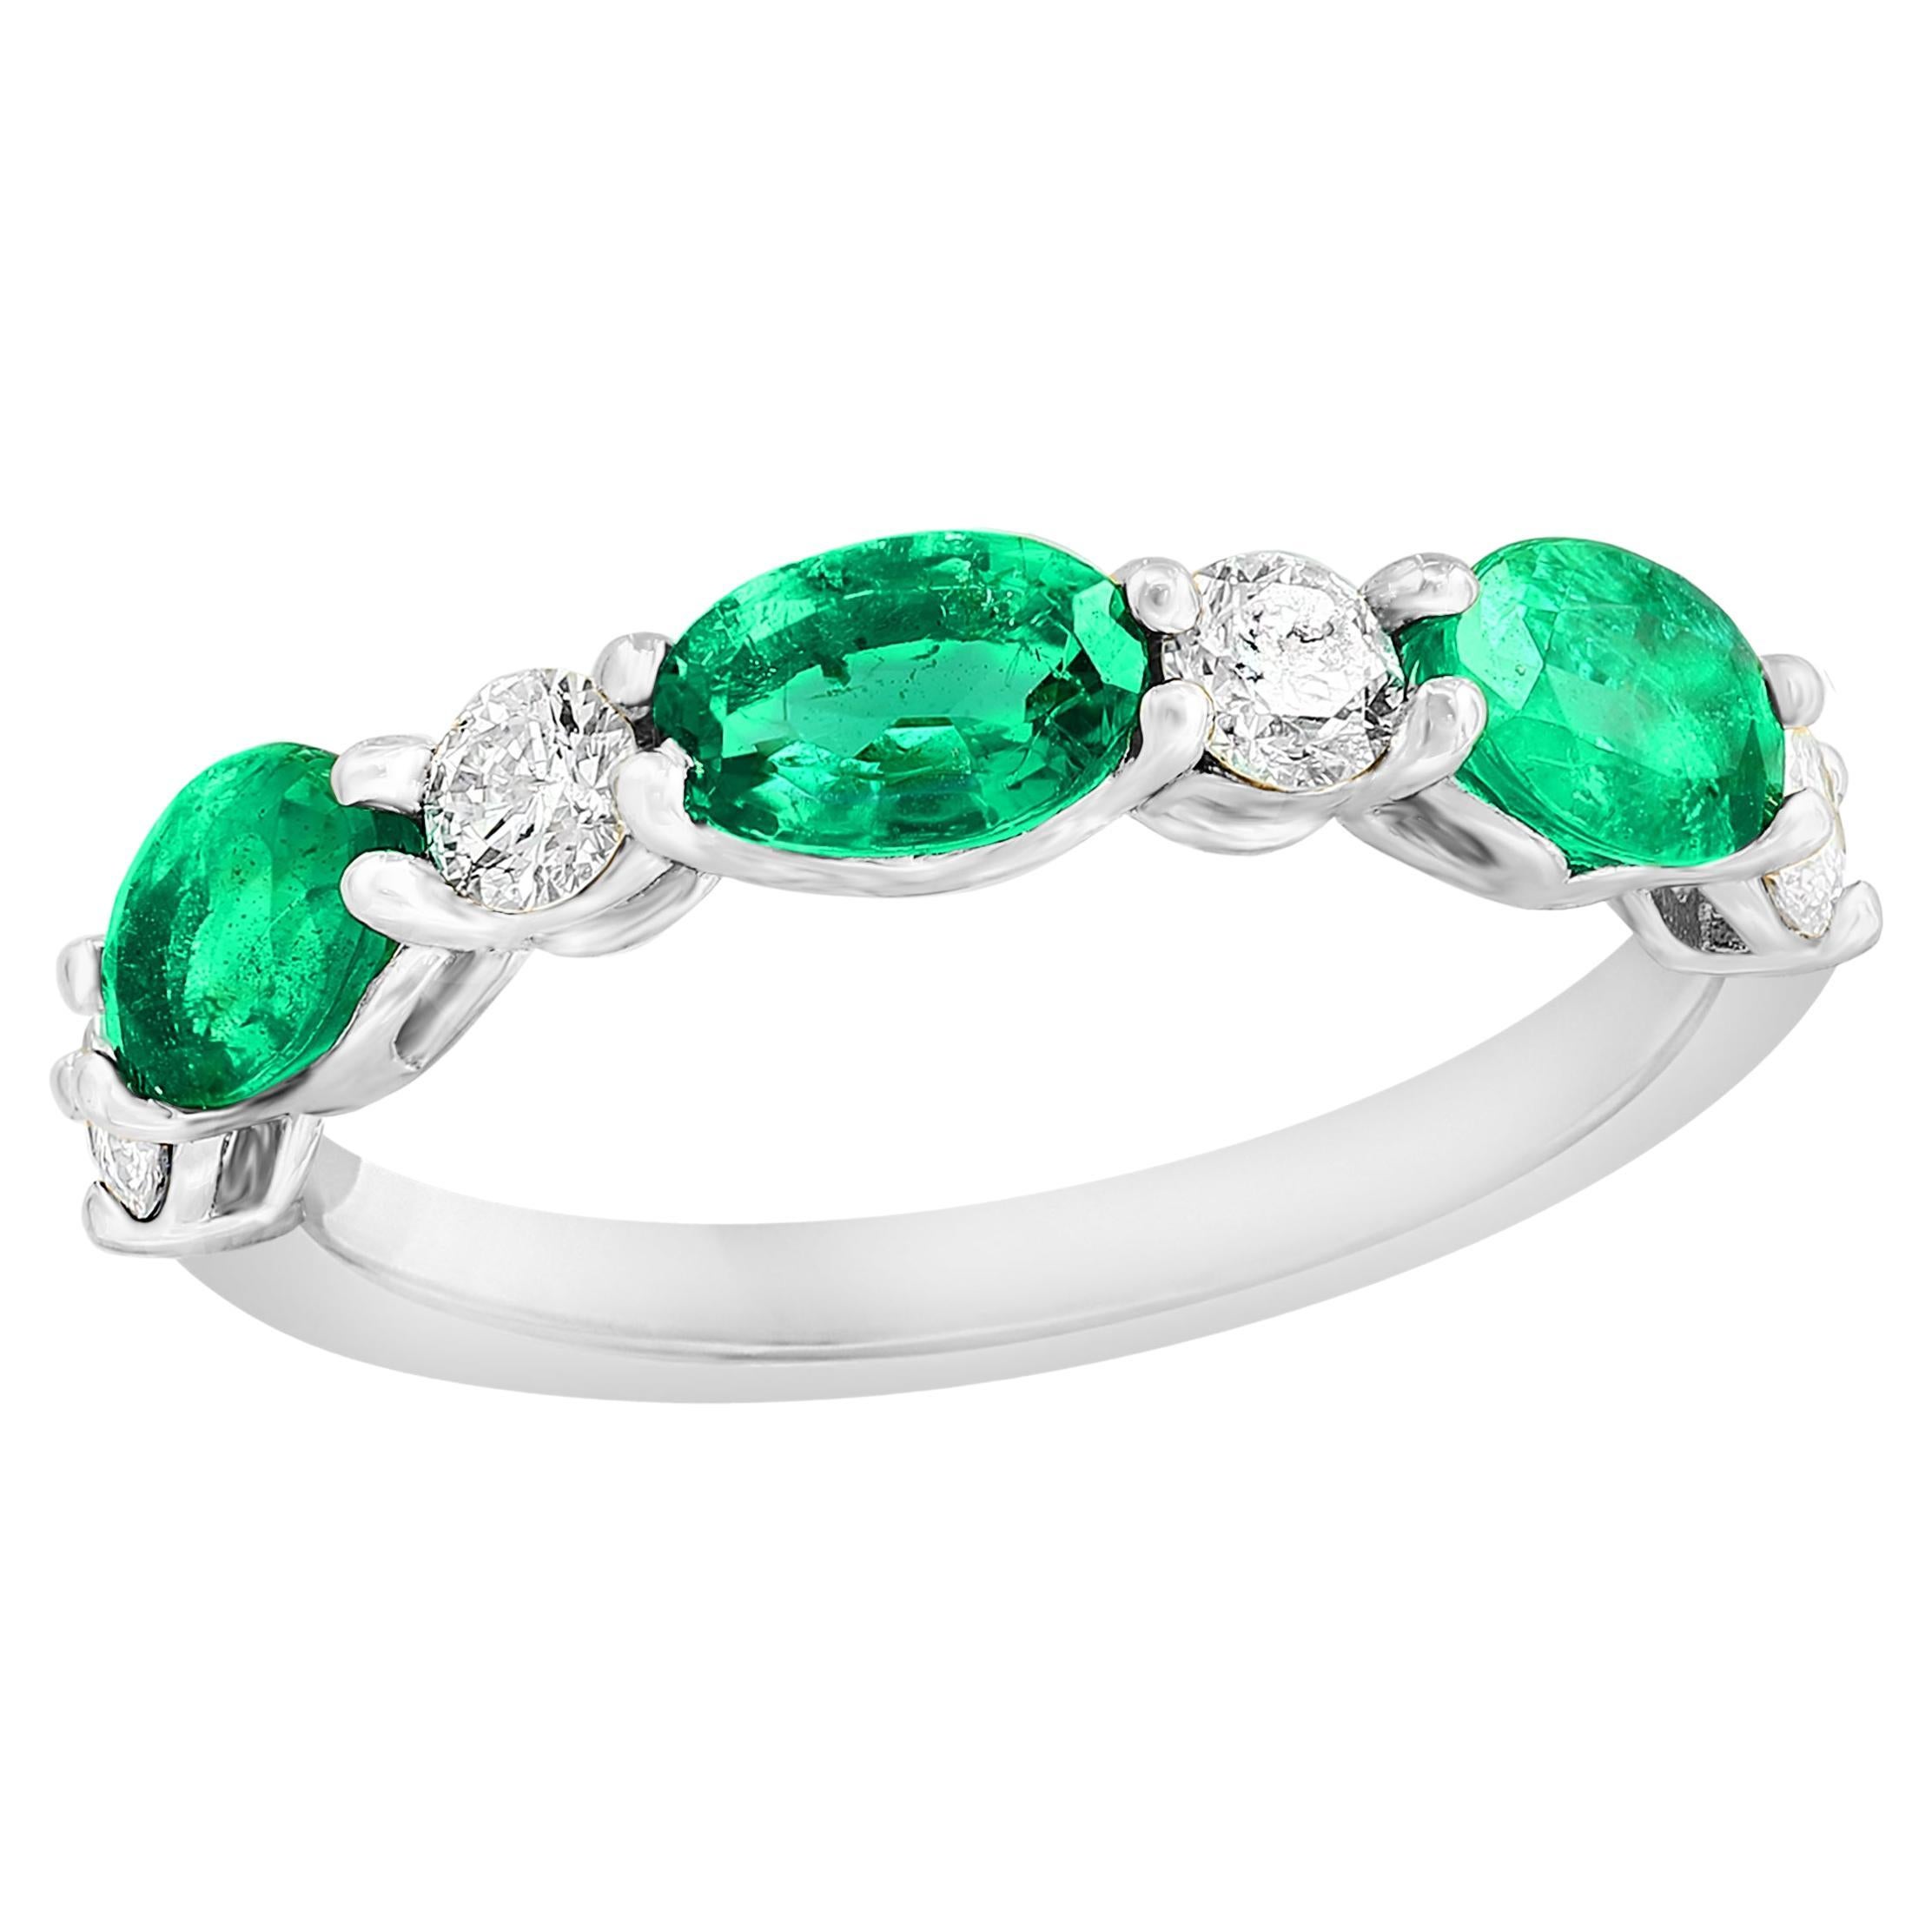 1.27 Carat Oval Cut Emerald and Diamond Band in 14K White Gold